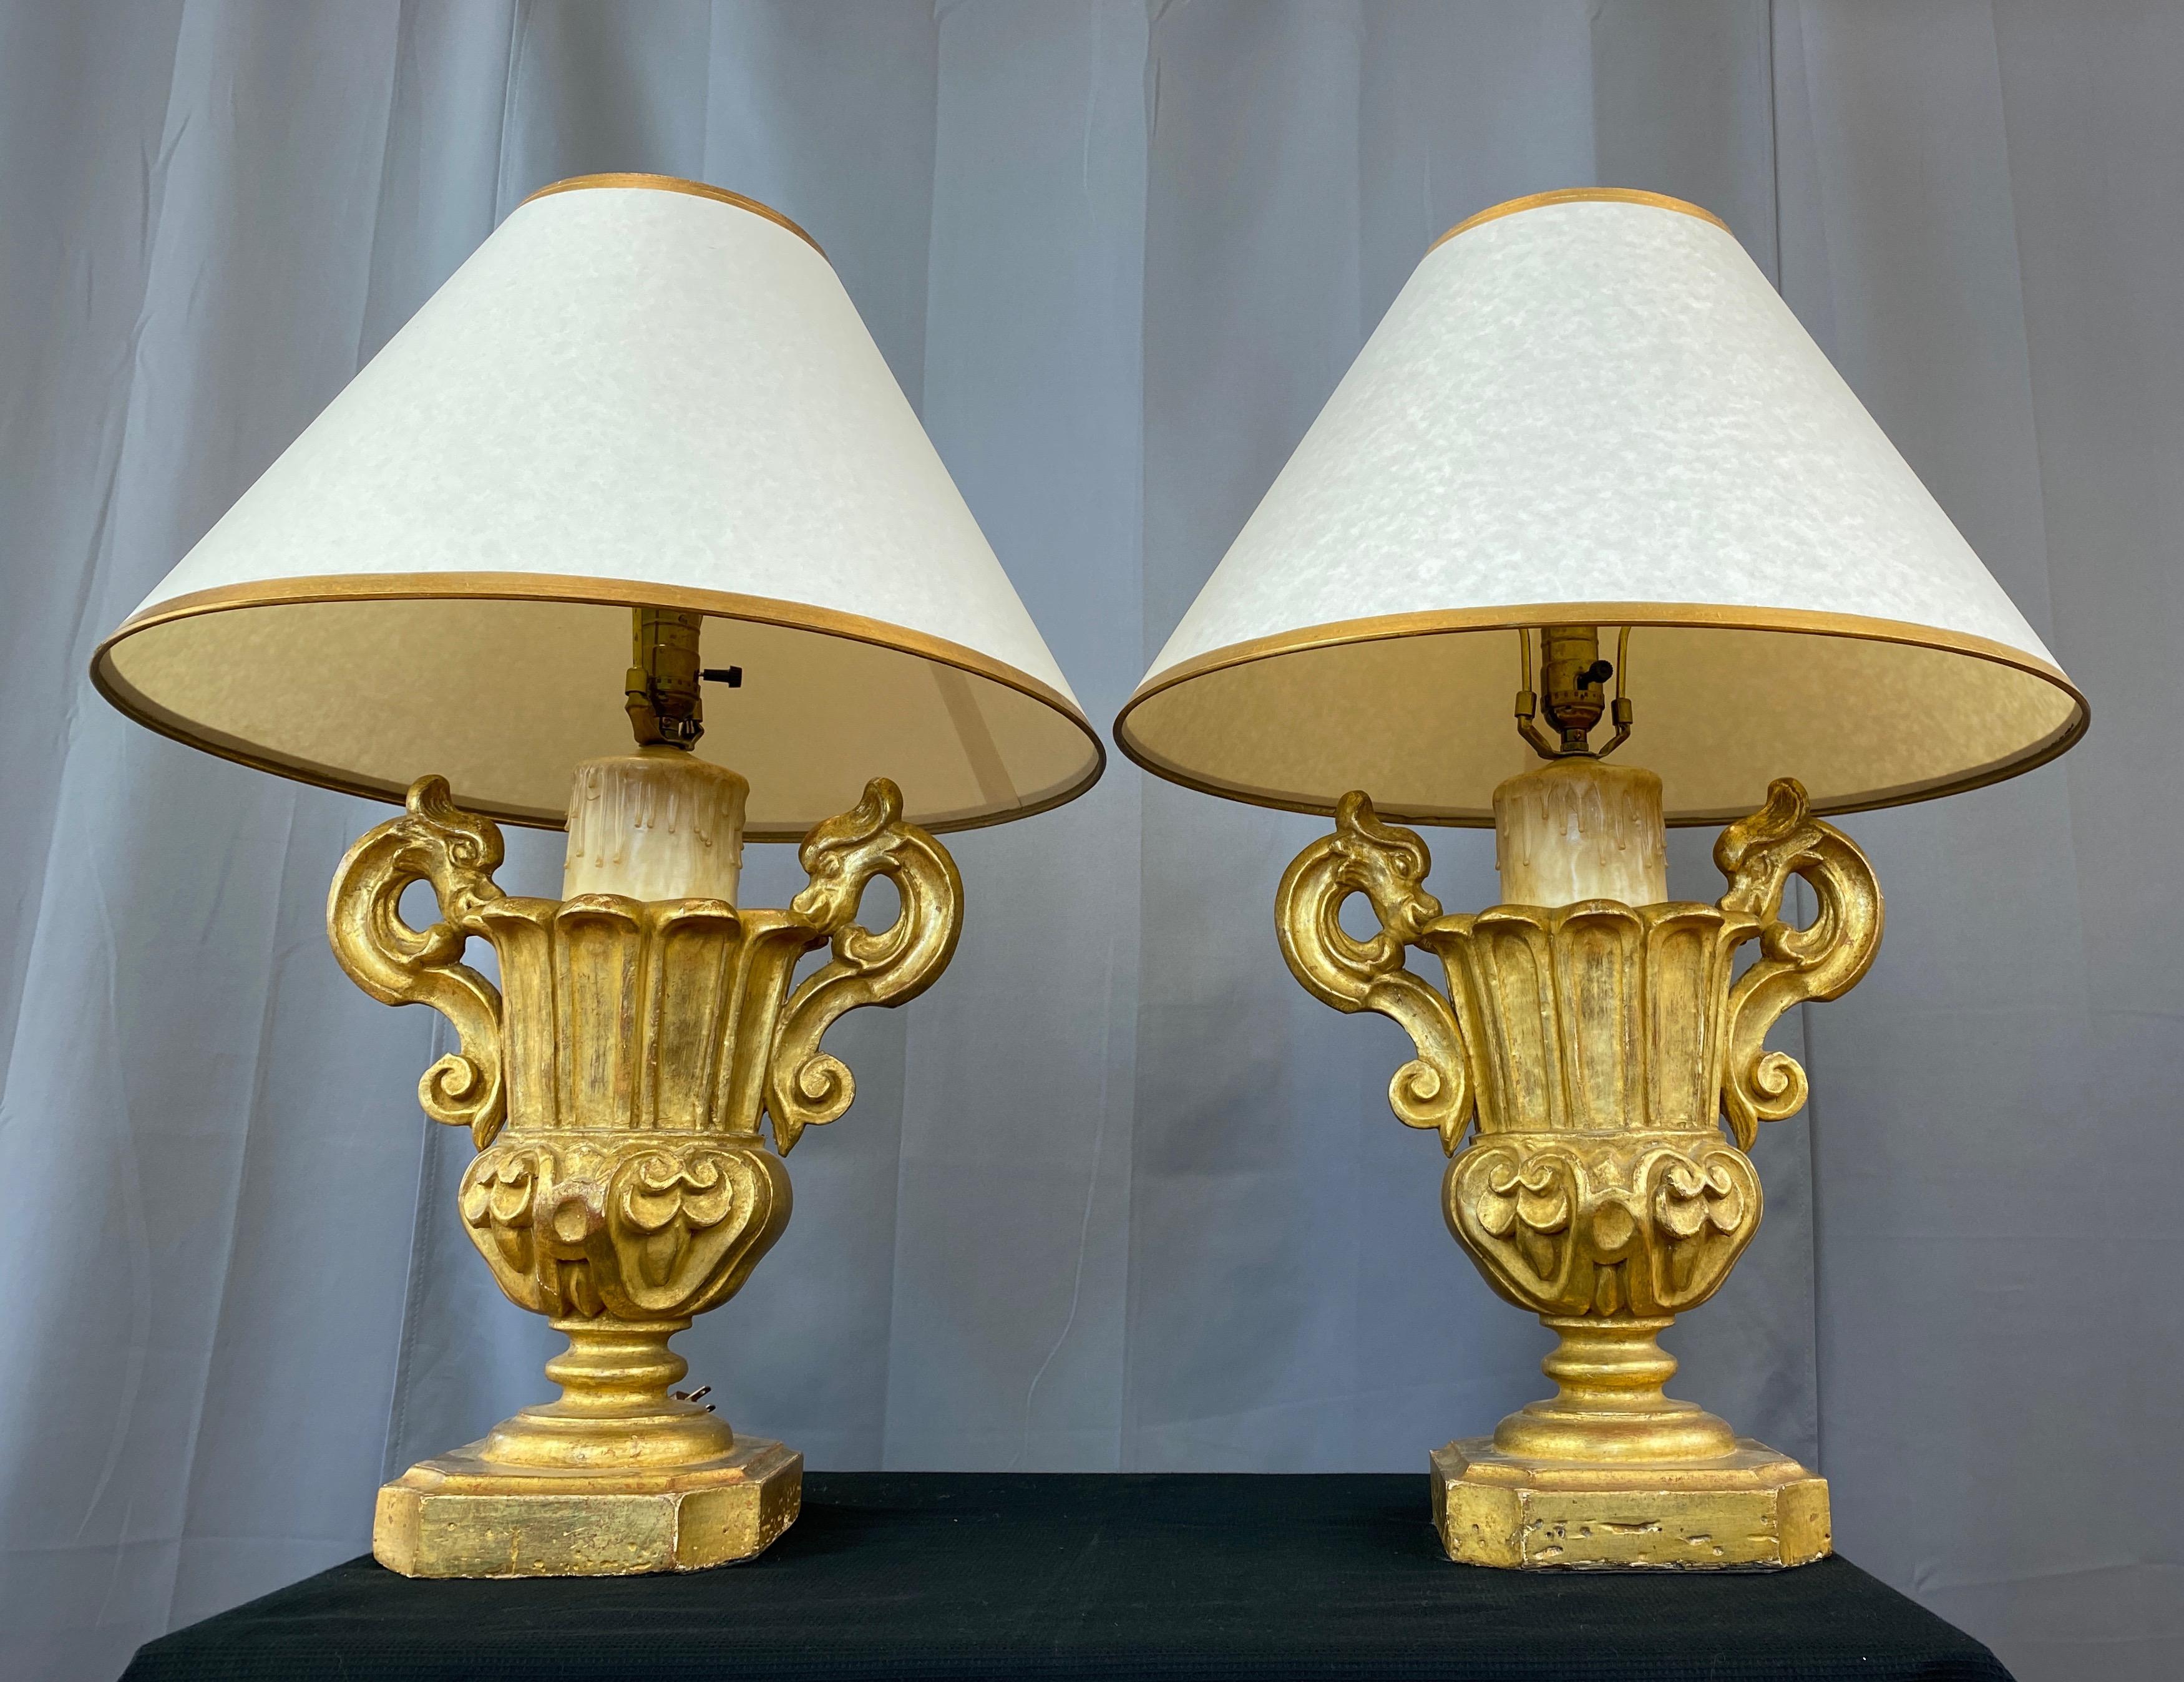 Pair of Italian Baroque Revival Giltwood Urn and Faux Candle Table Lamps, 1930s For Sale 3